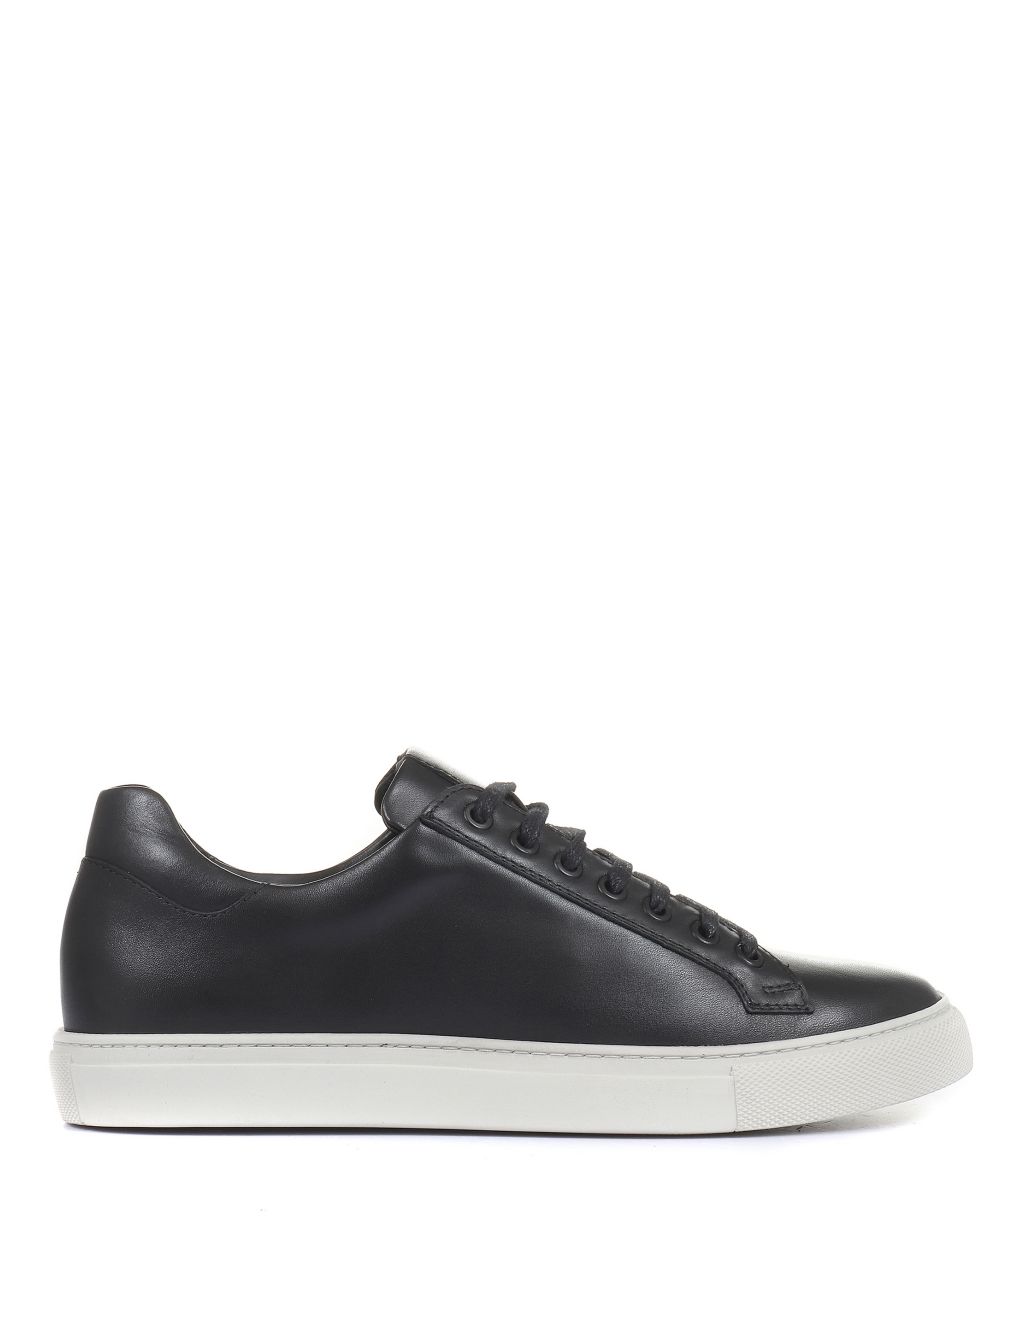 Leather Lace-Up Trainers image 5